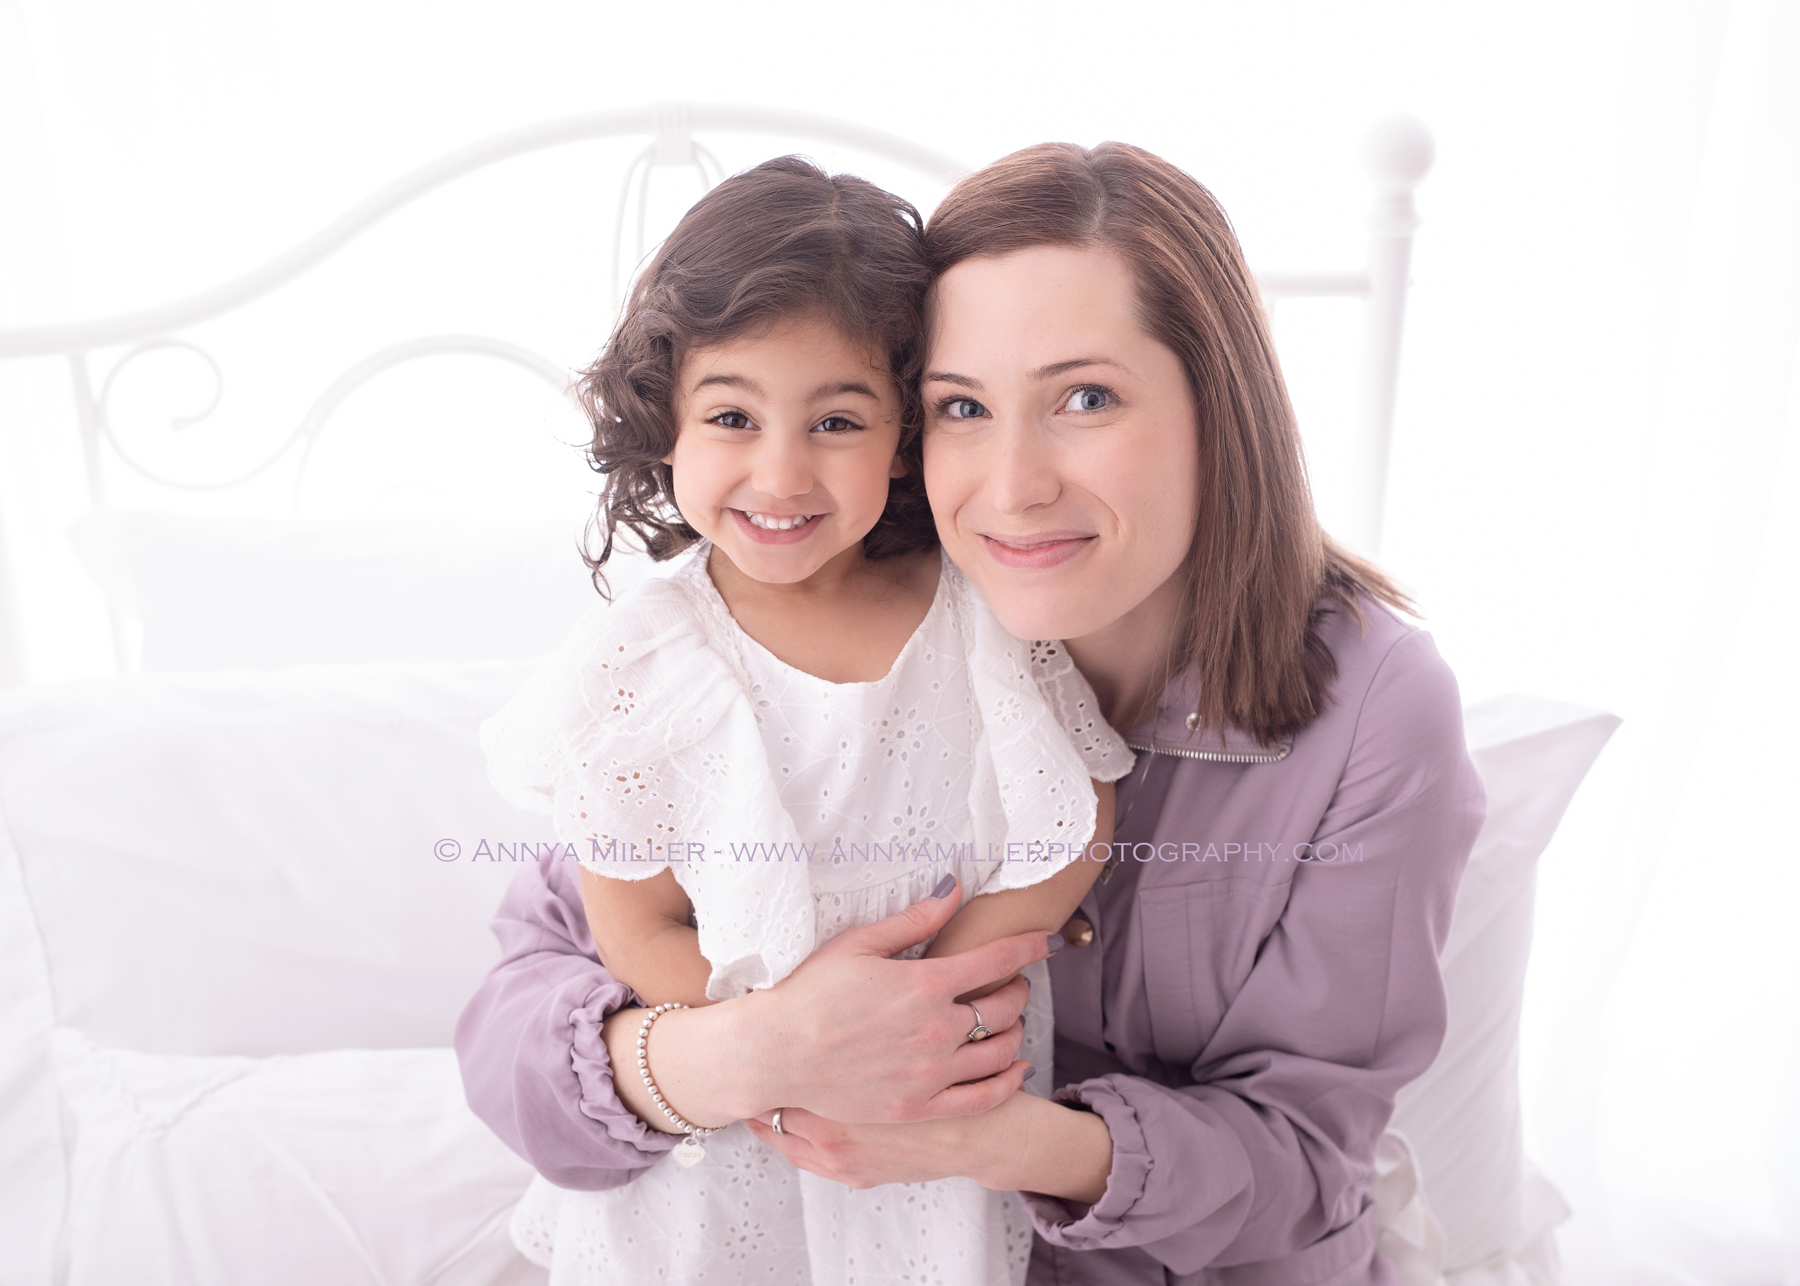 Durham region Mother's Day photography session by Annya Miller Photography in Pickering